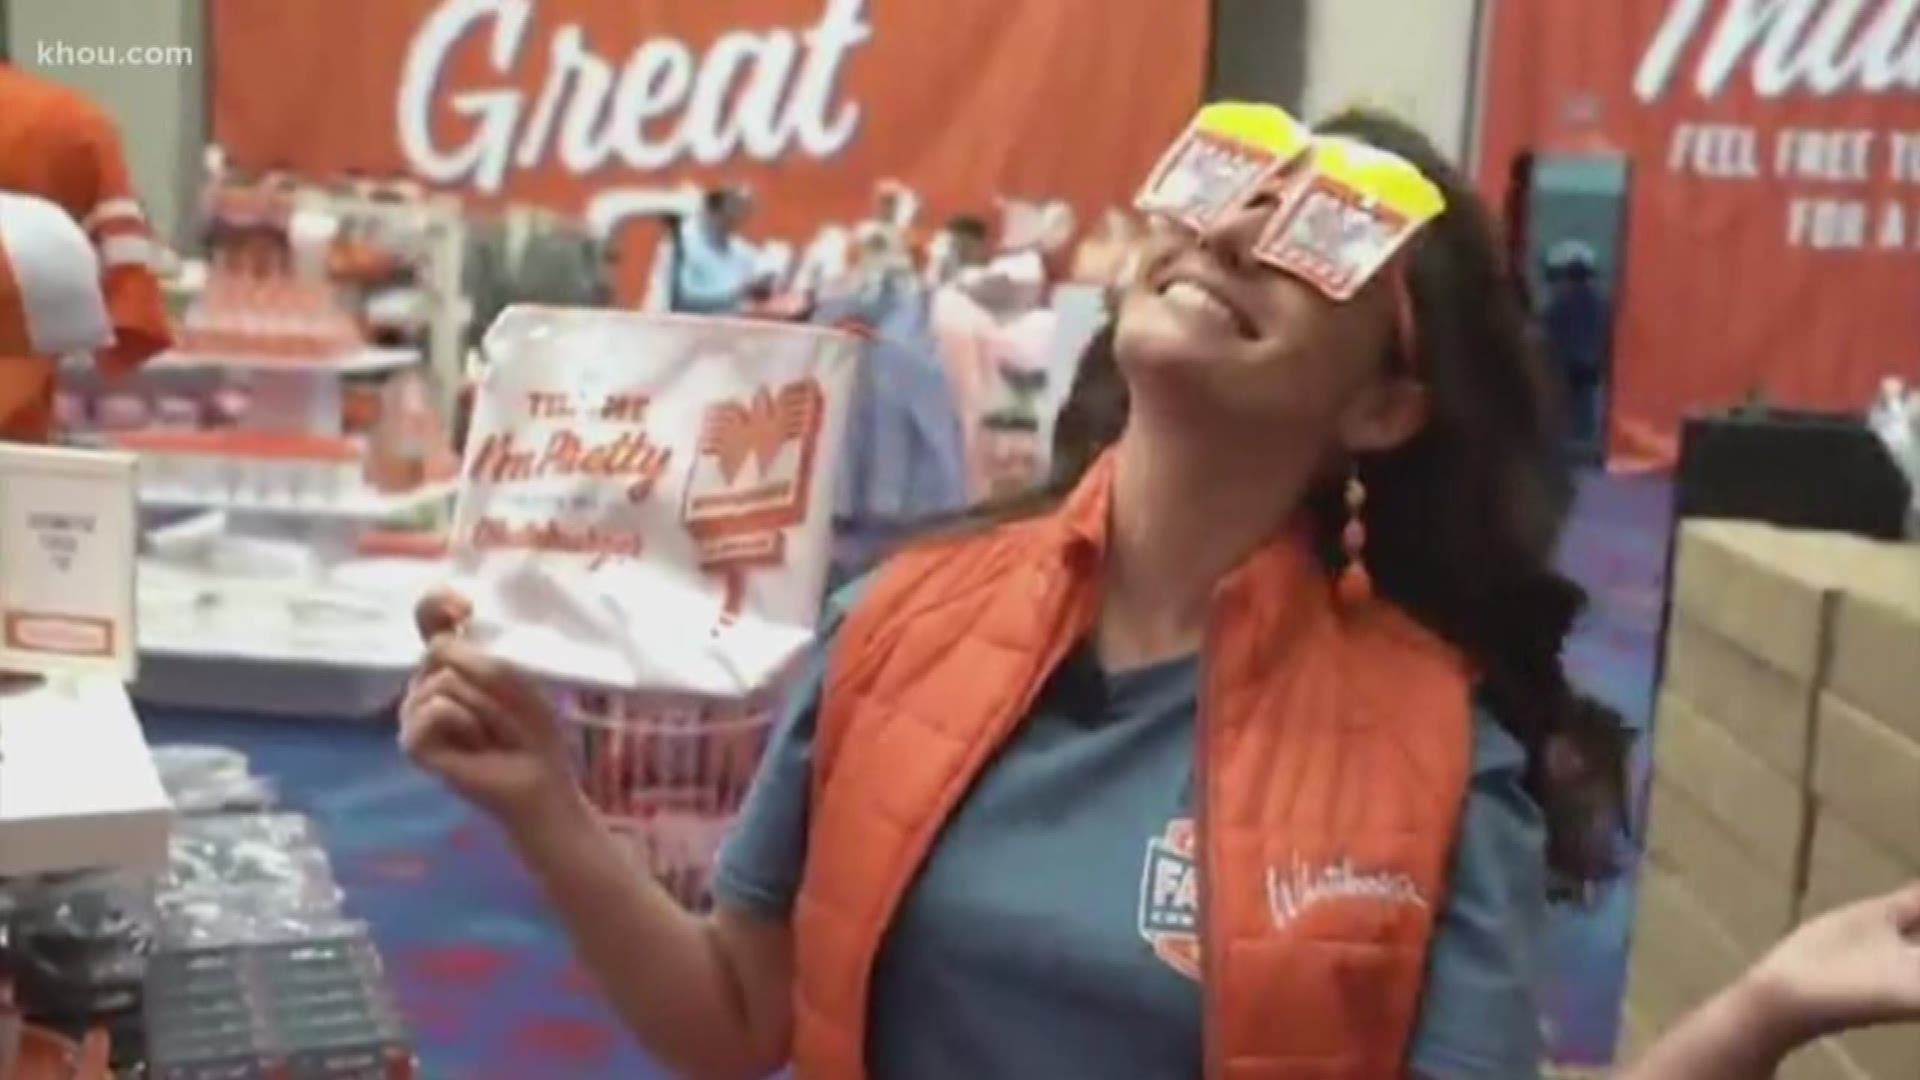 If you see giant spicy ketchup packets and french fries downtown, unfortunately they're not for you to eat. Whataburger's 2019 Family Convention is happening at the George R. Brown Convention Center. It's for employees and their families.